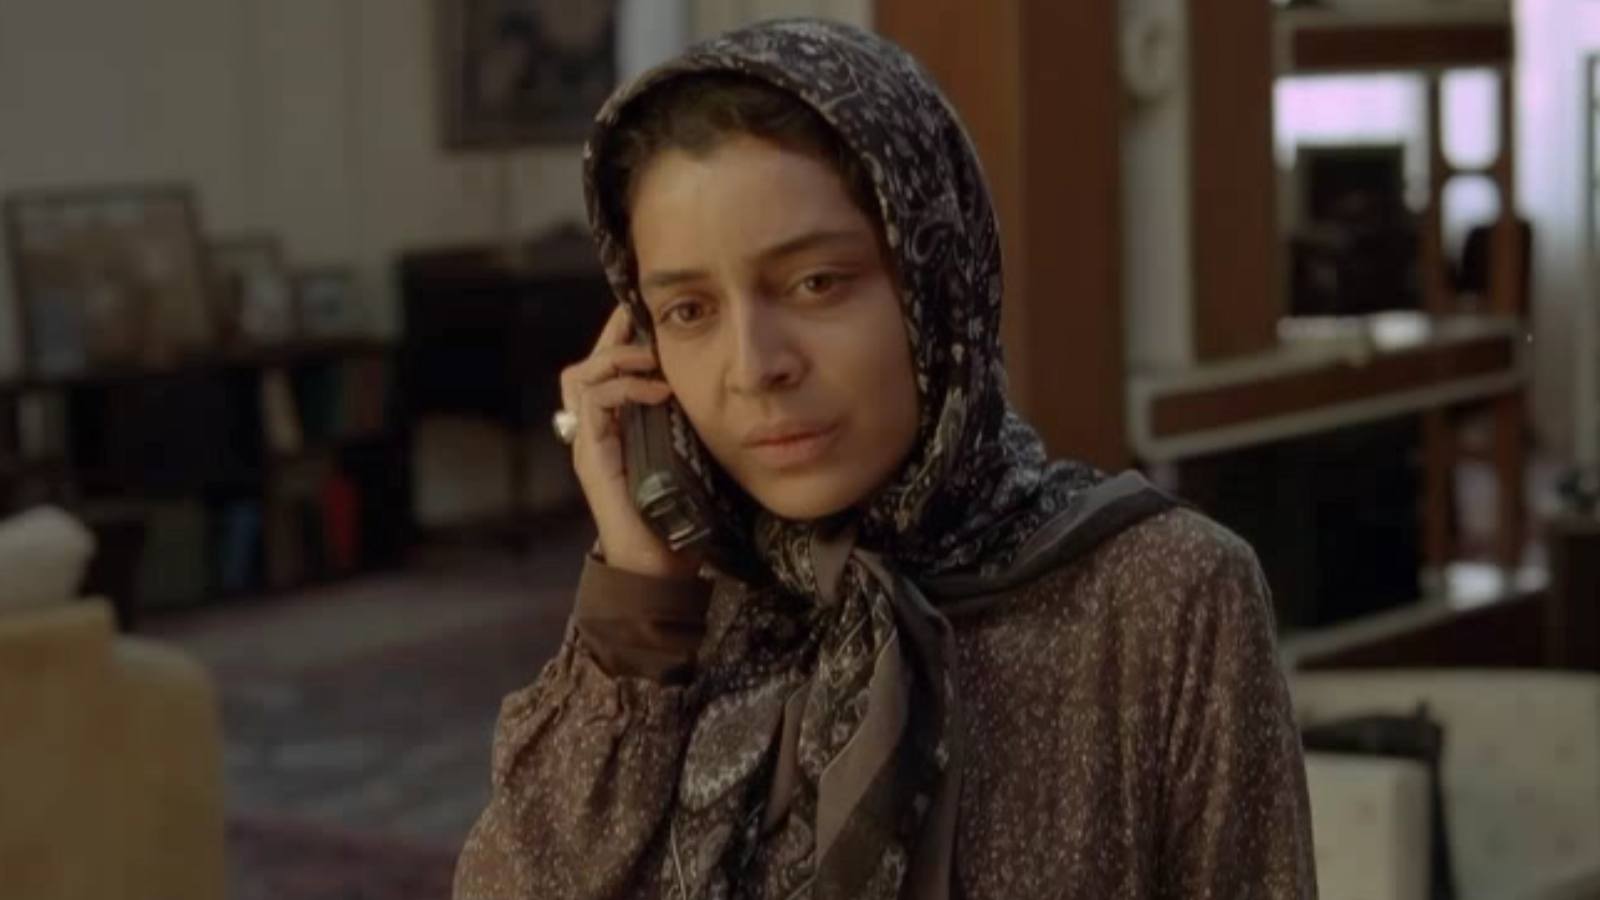 A Separation Movie Review